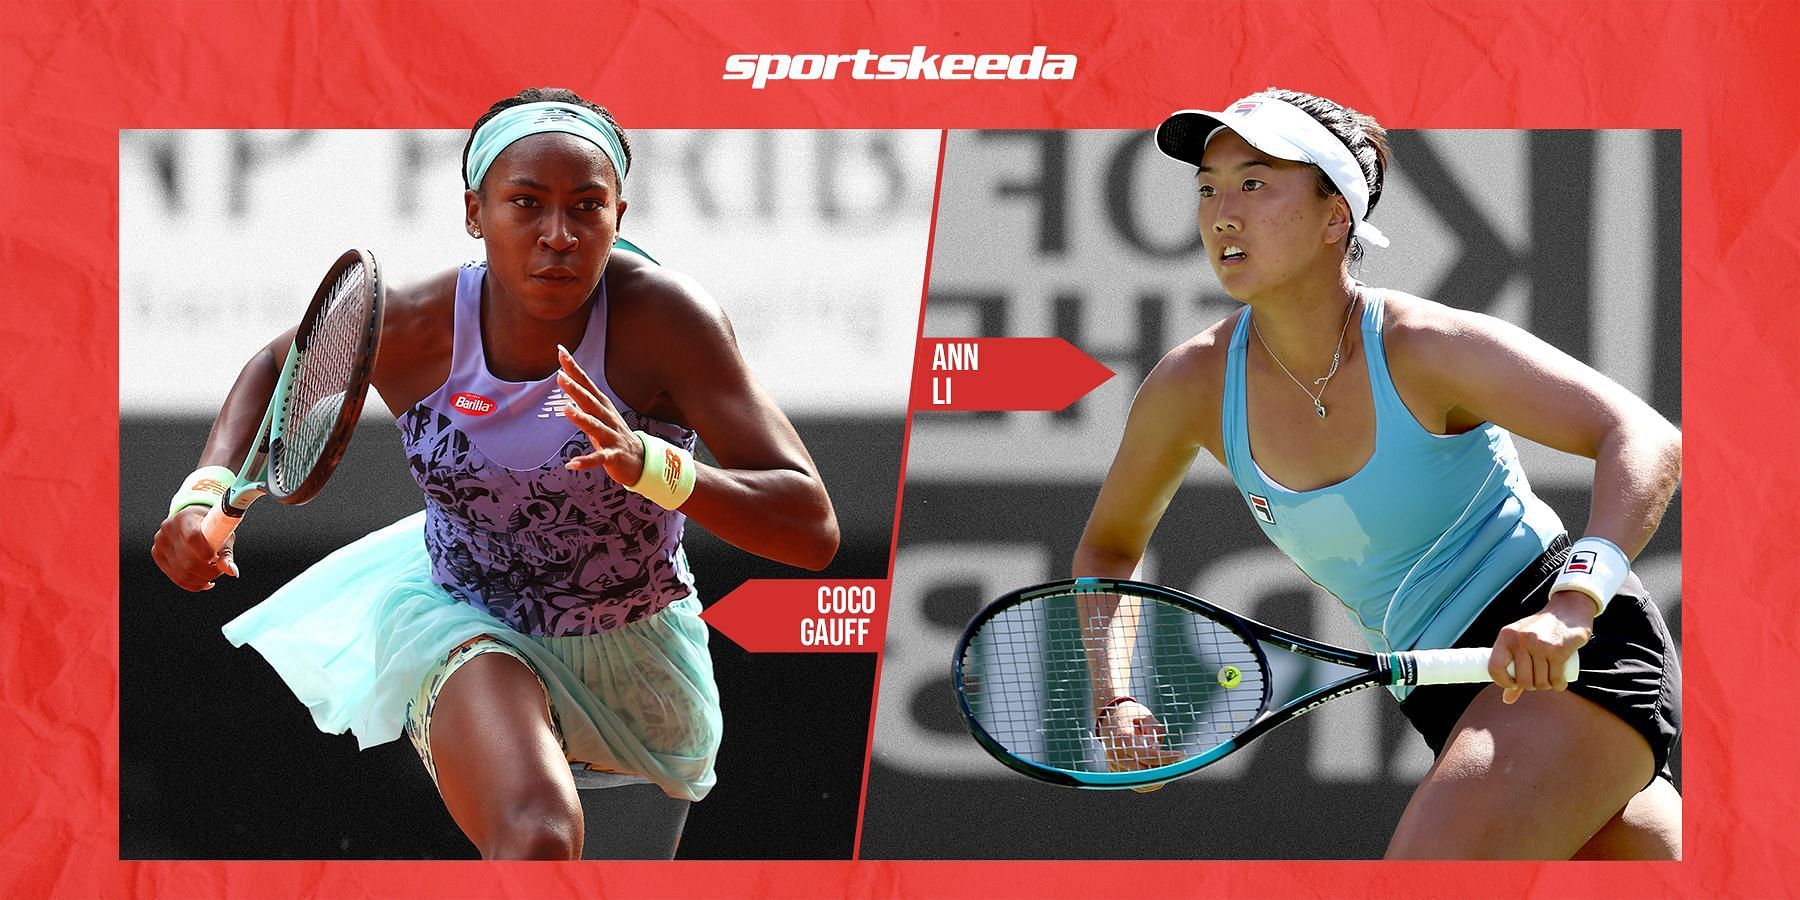 Coco Gauff (L) and Ann Li are set for a first-round encounter.